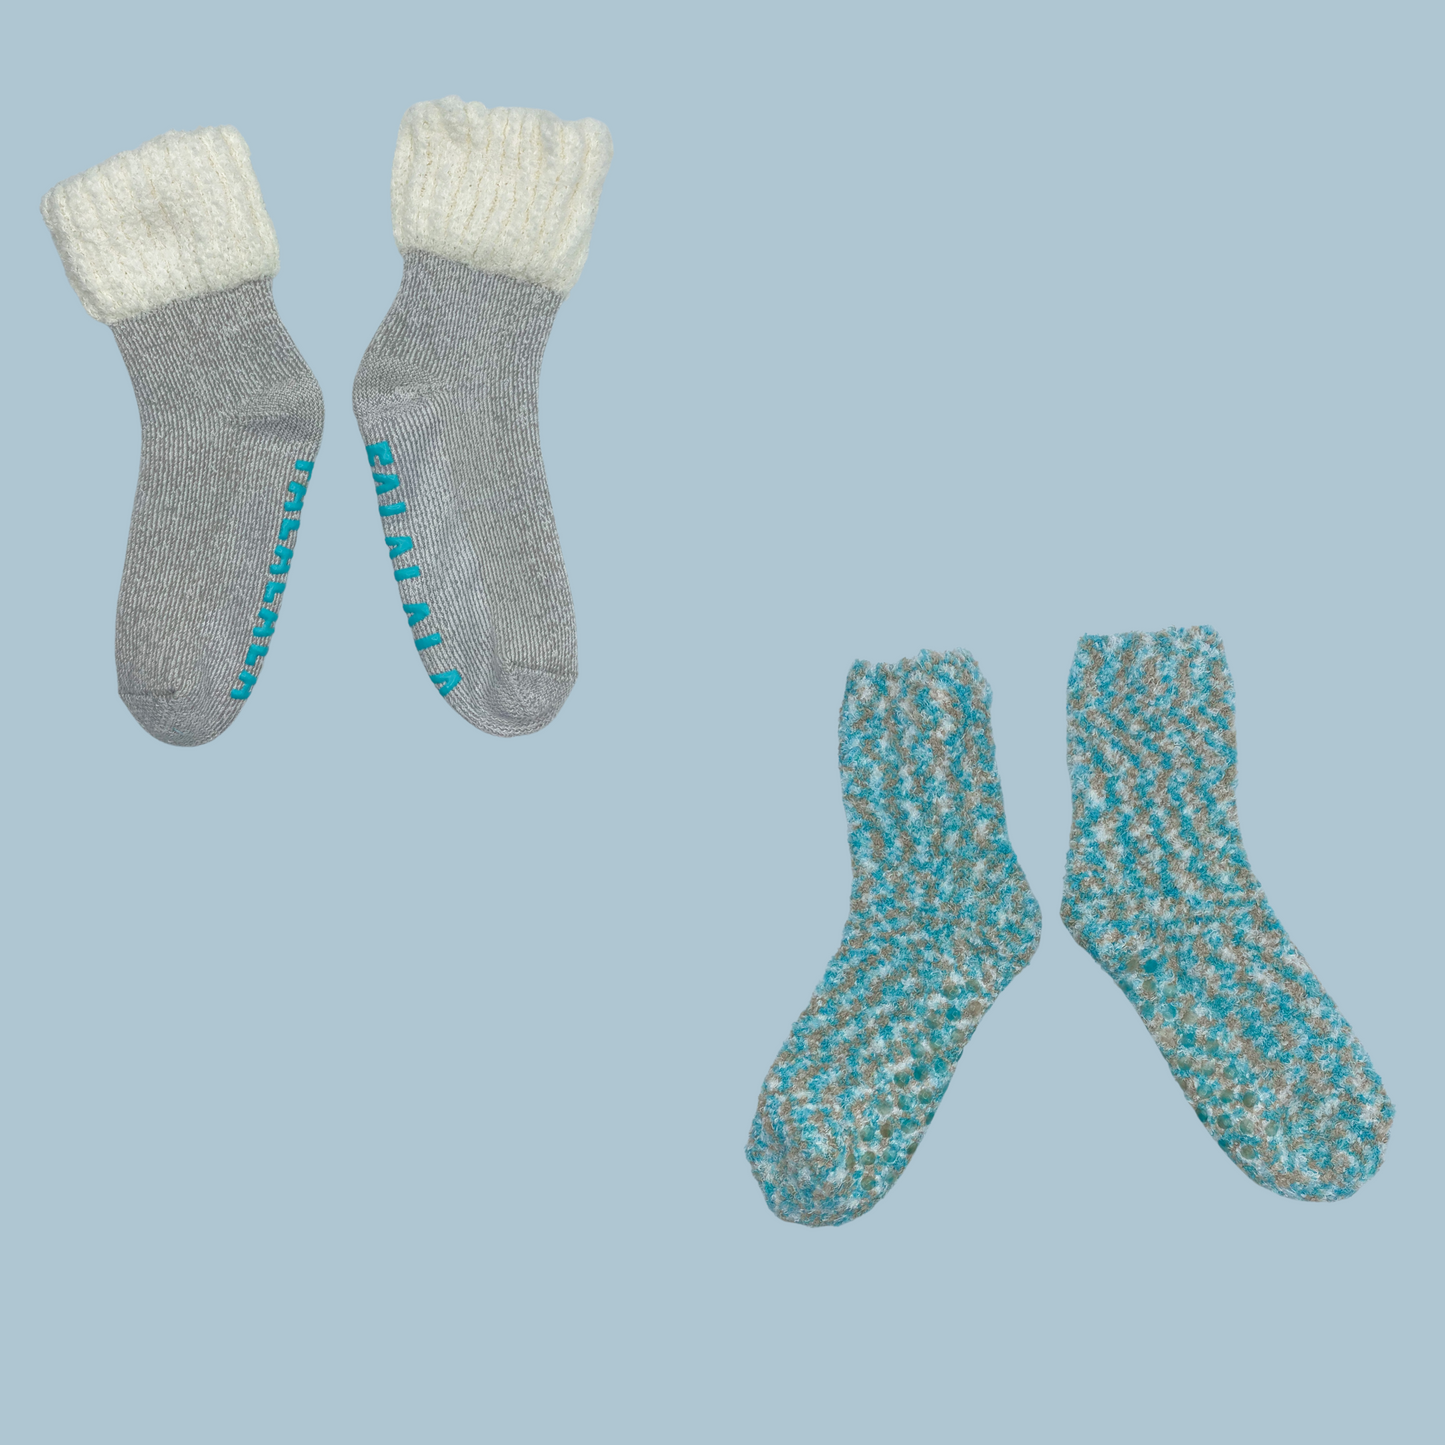 FALALALA Holiday Slipper Socks with Grippers 2 Pack